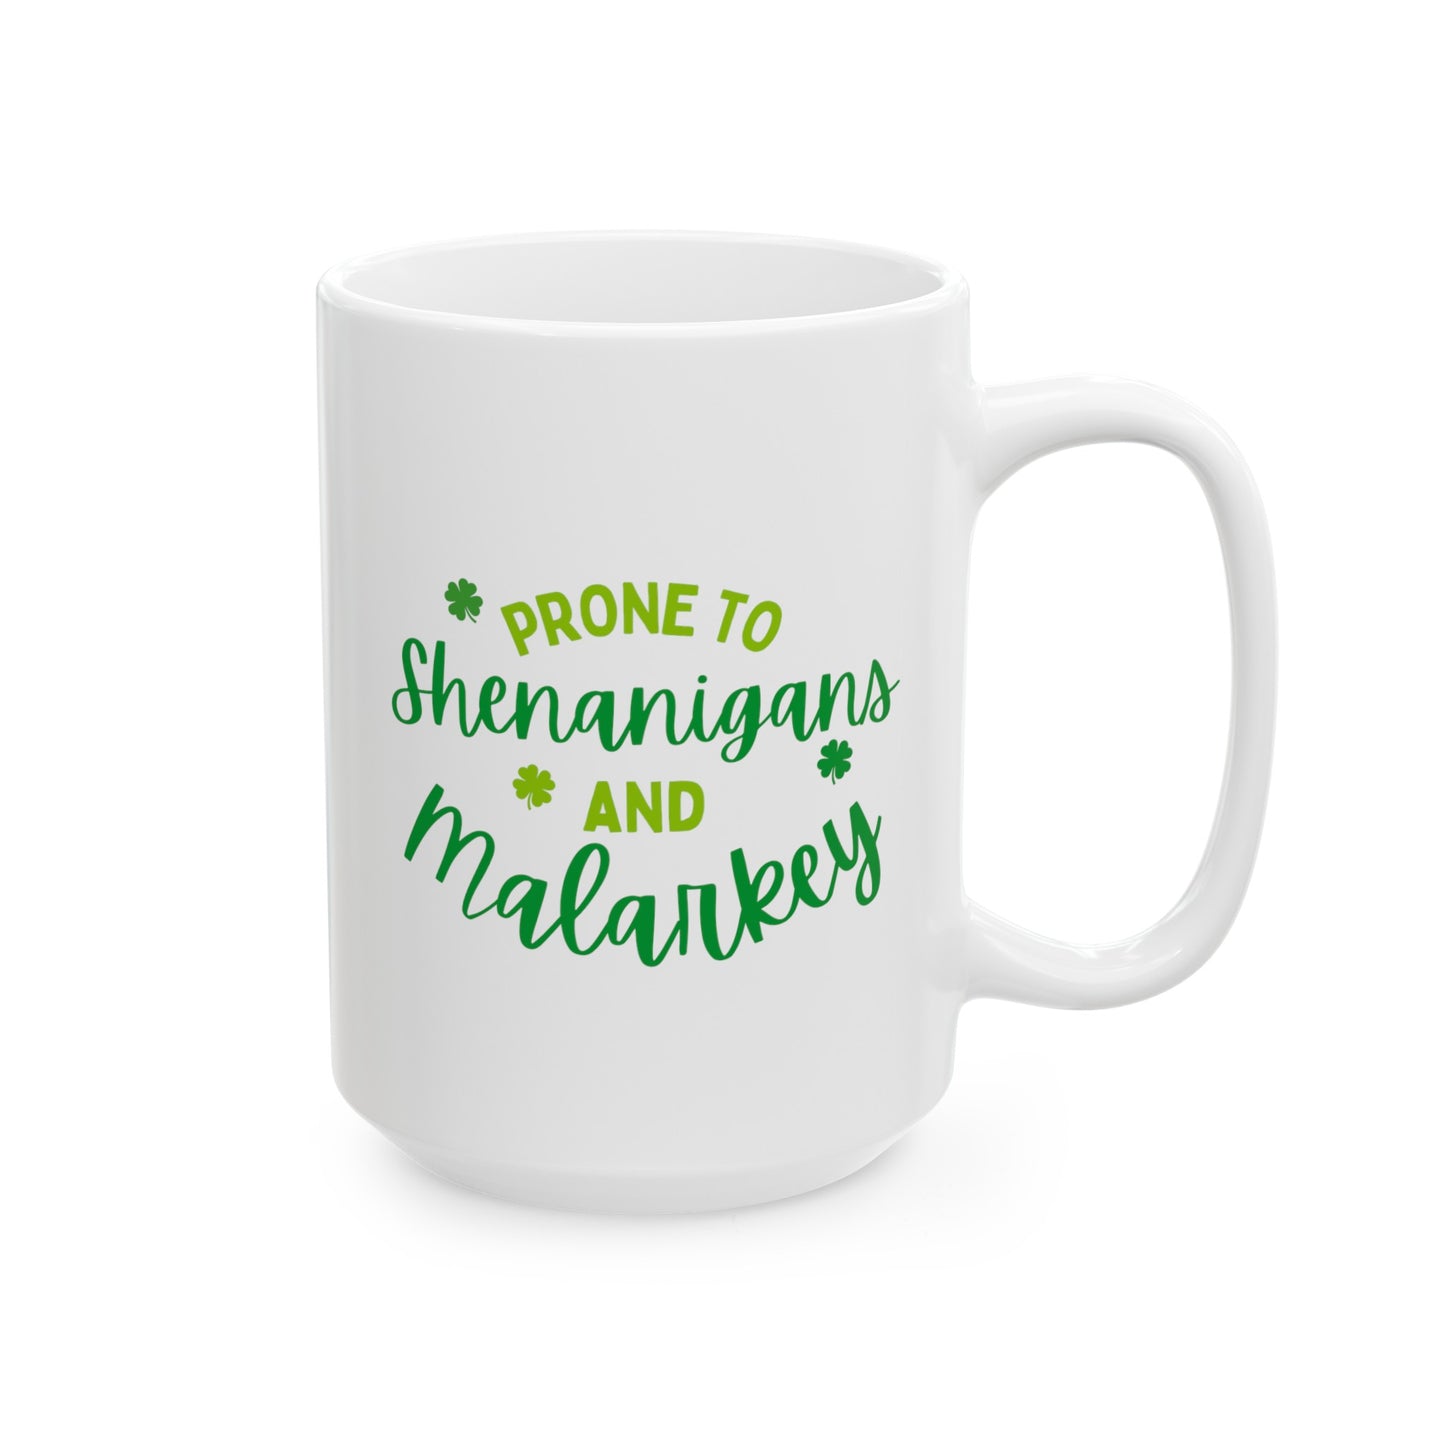 Prone To Shenanigans And Malarkey 15oz white funny large coffee mug gift for st pattys patricks day her wife girlfriend aunt daughter green waveywares wavey wares wavywares wavy wares